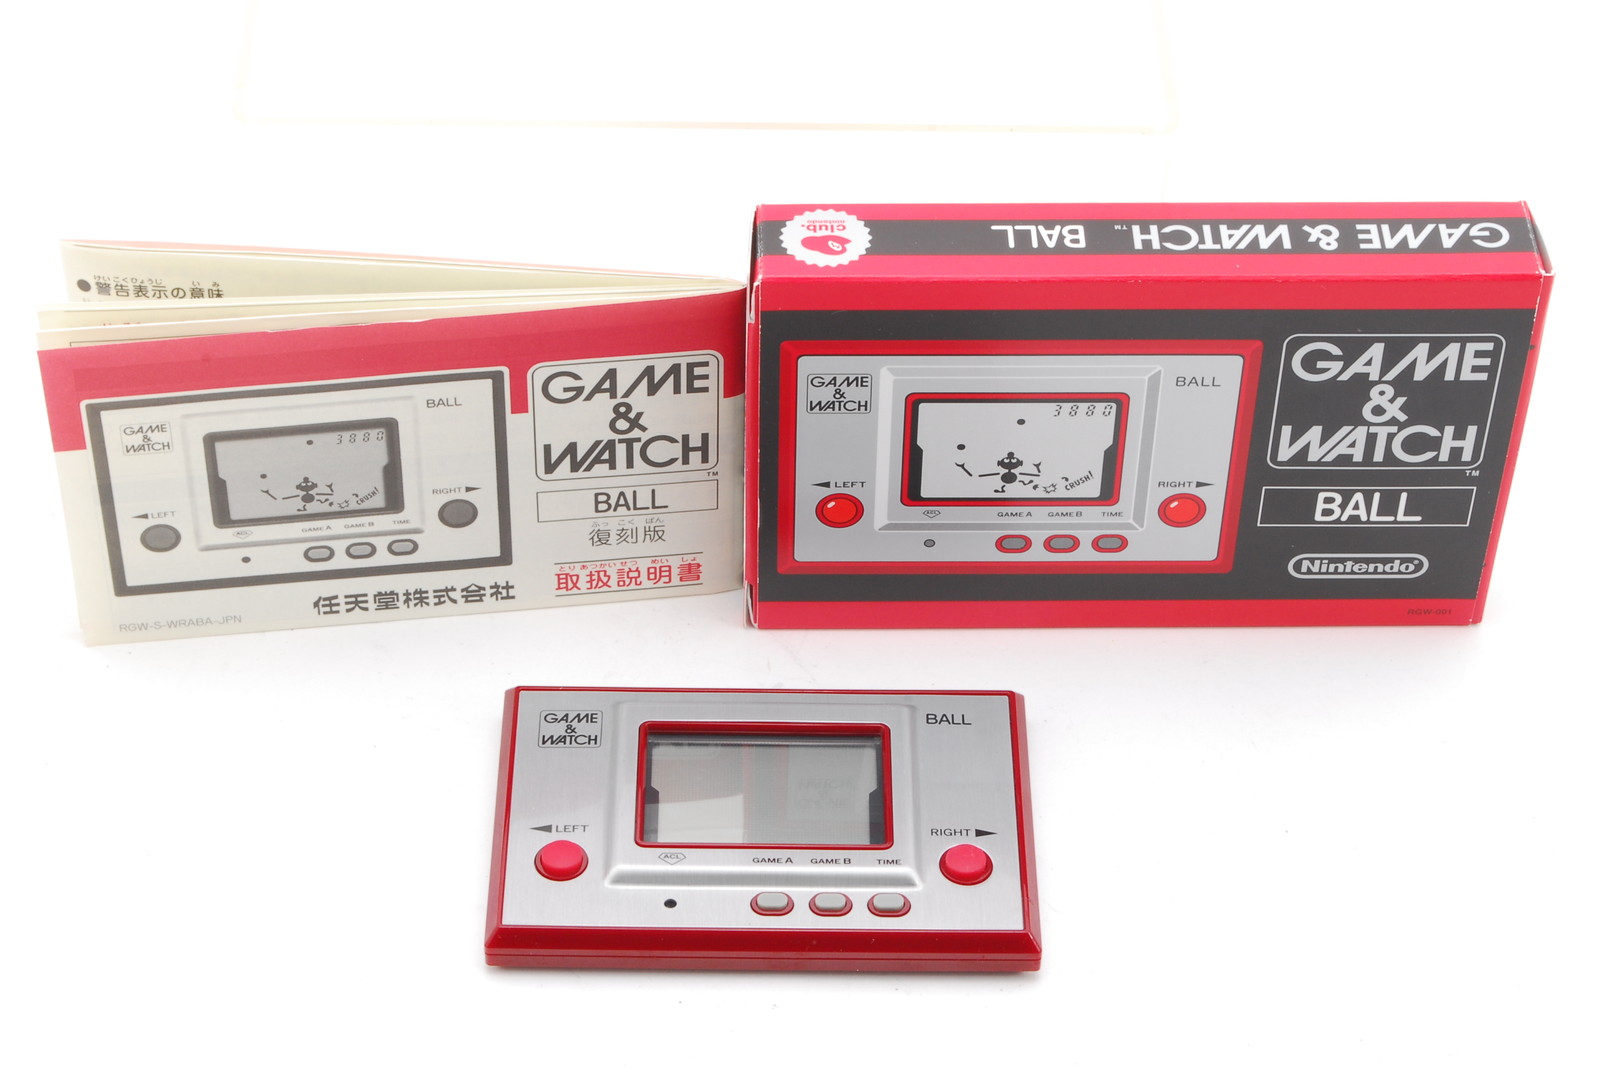 PROMOTION. MINT Nintendo Game & Watch Ball Club Nintendo Limited Model RGW-001, Box, Manual from Japan